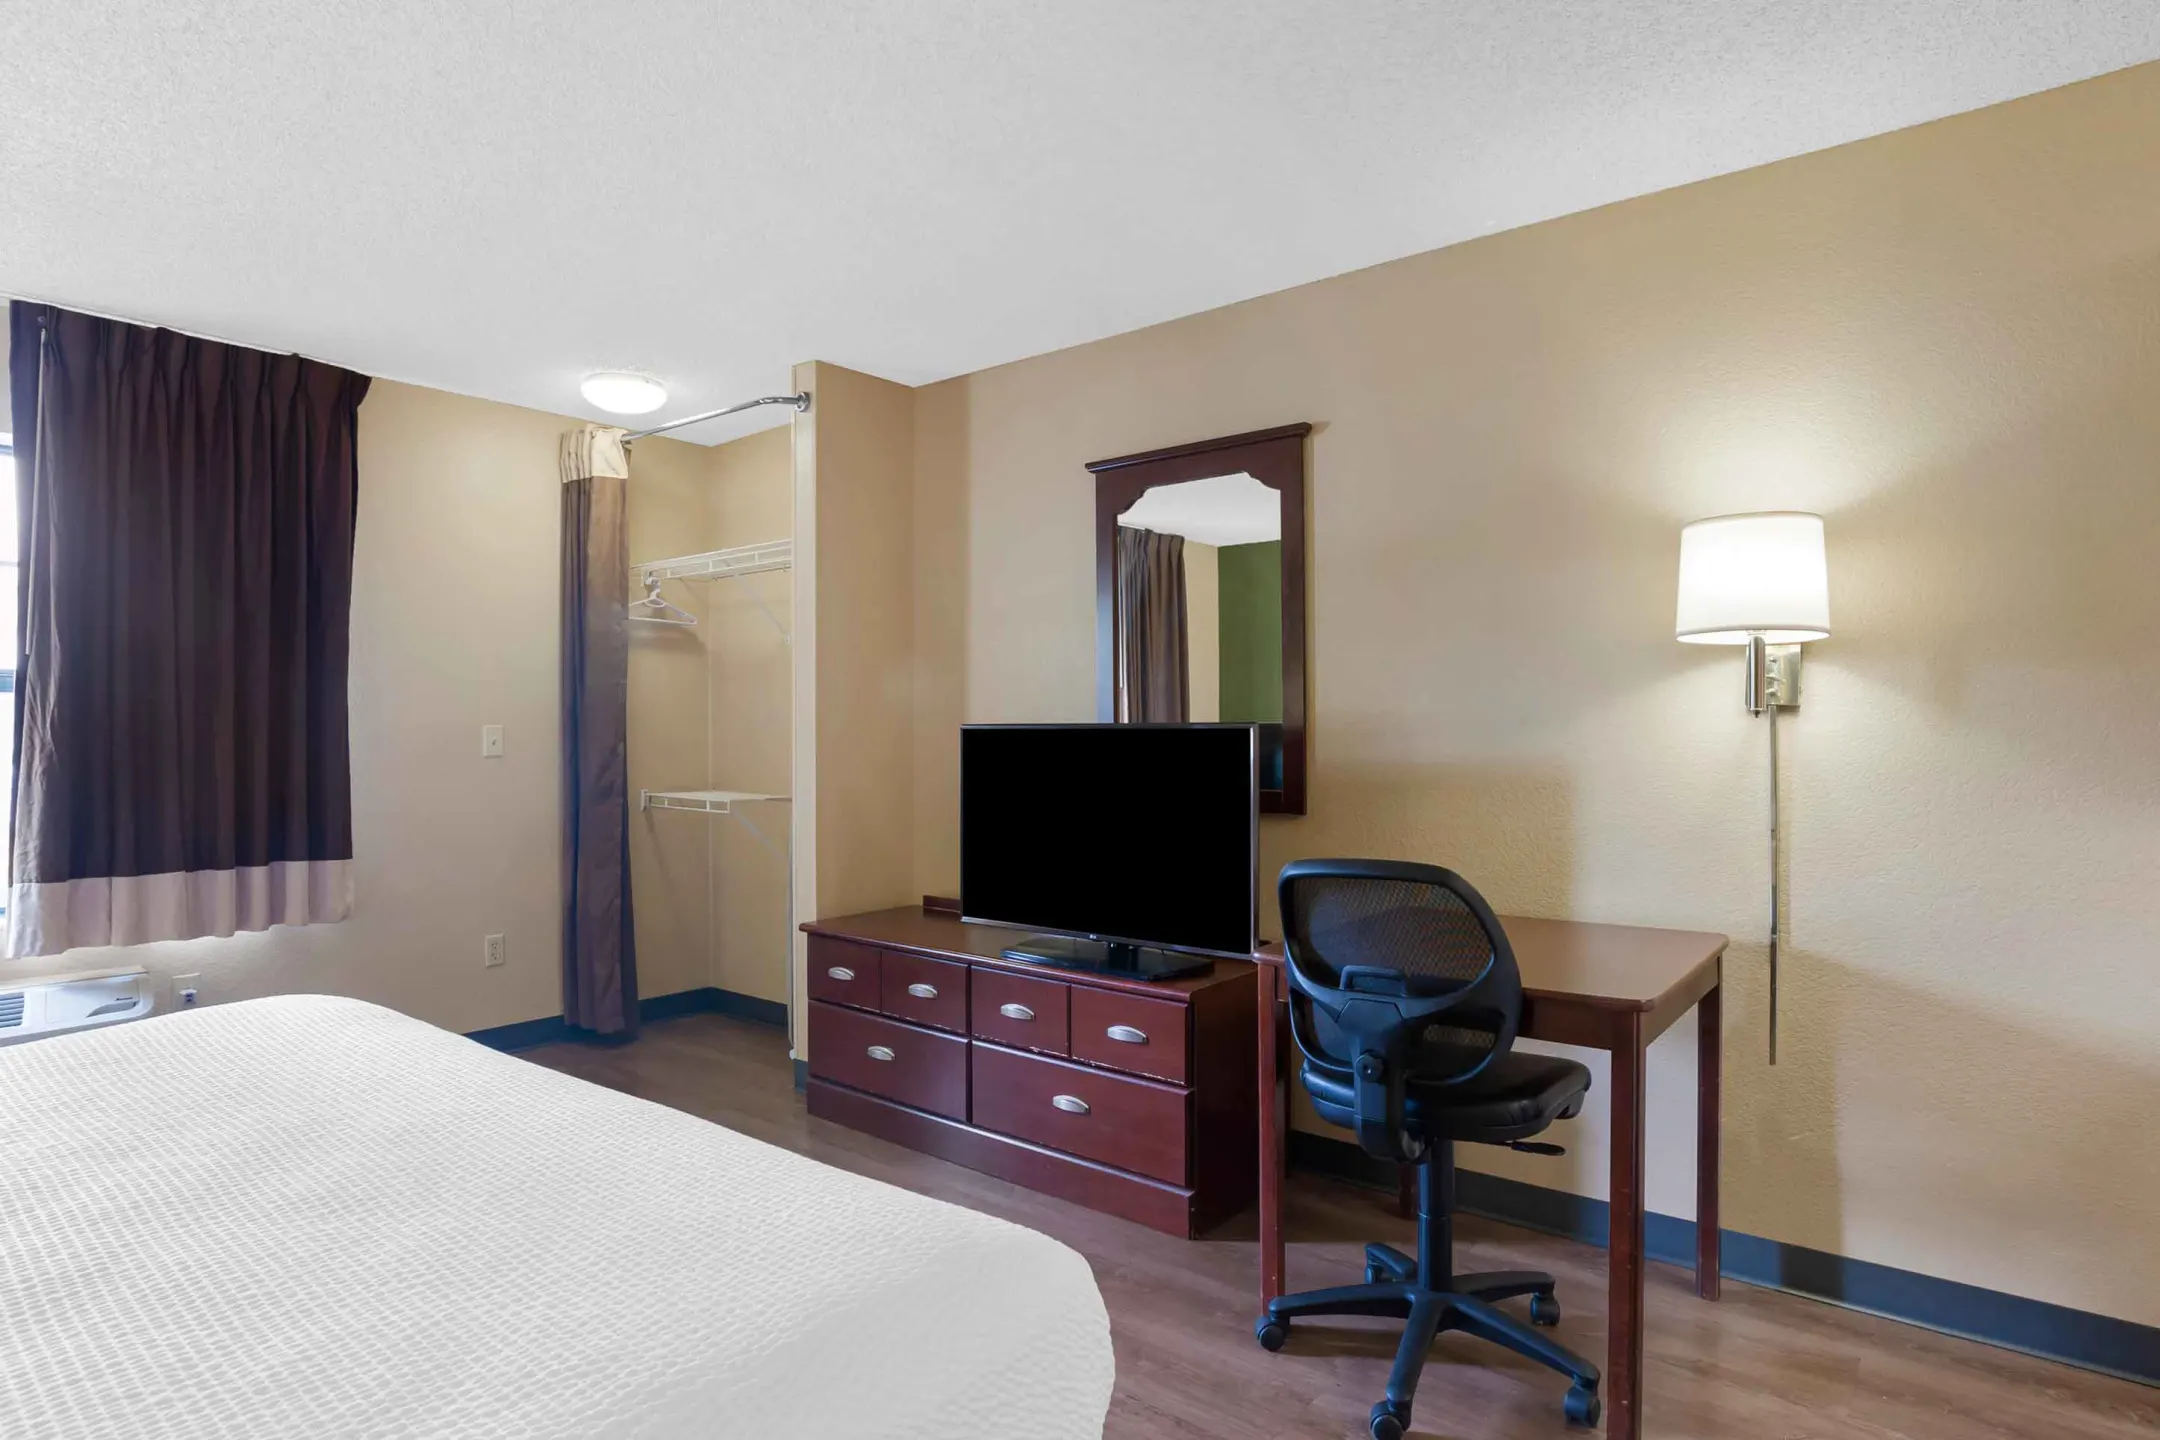 Bedroom - Furnished Studio - Seattle - Bothell - West - Bothell, WA